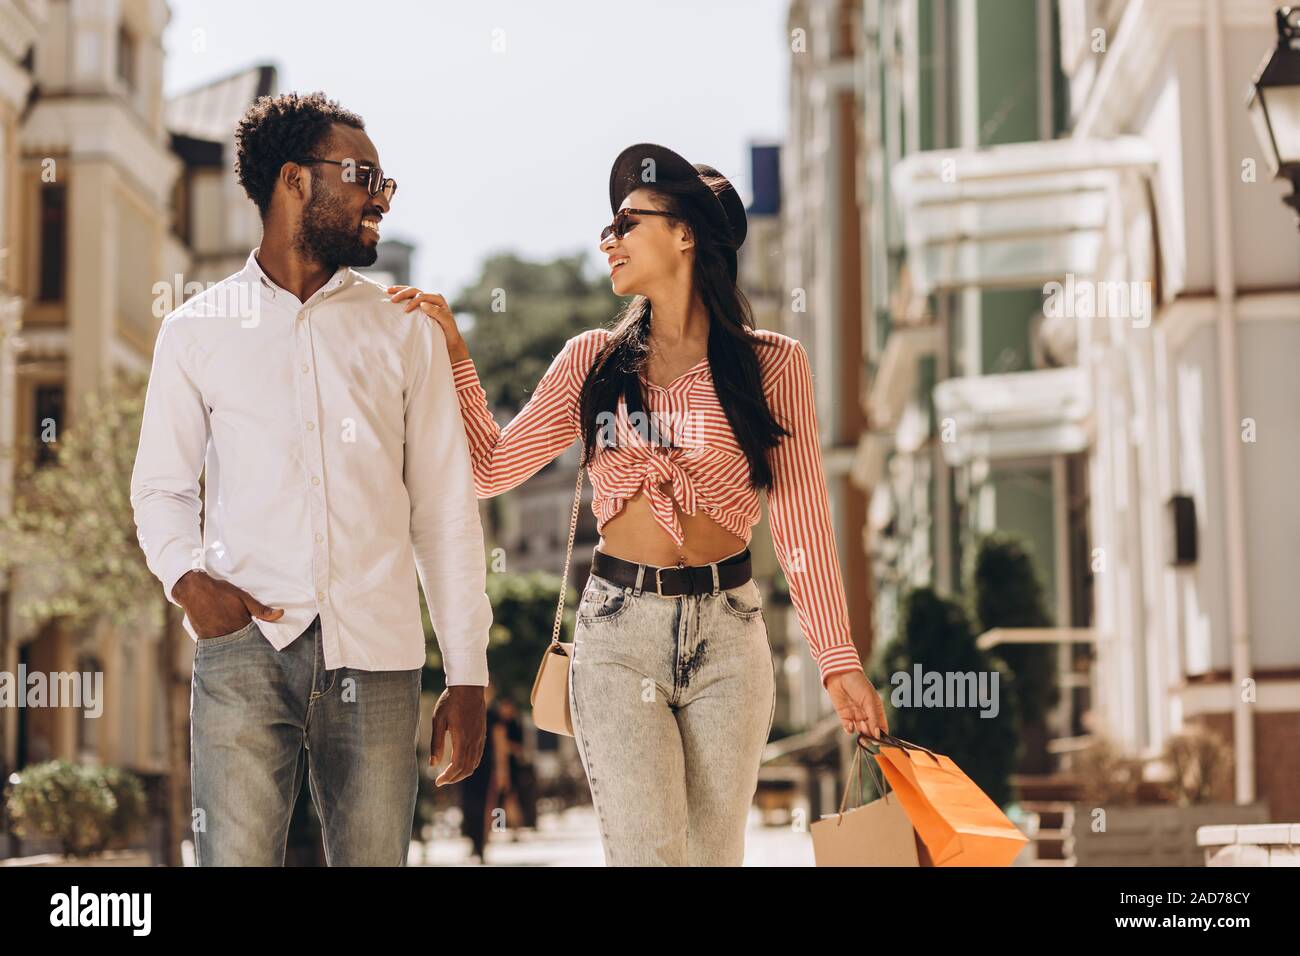 Delighted lady walking with boyfriend stock photo Stock Photo